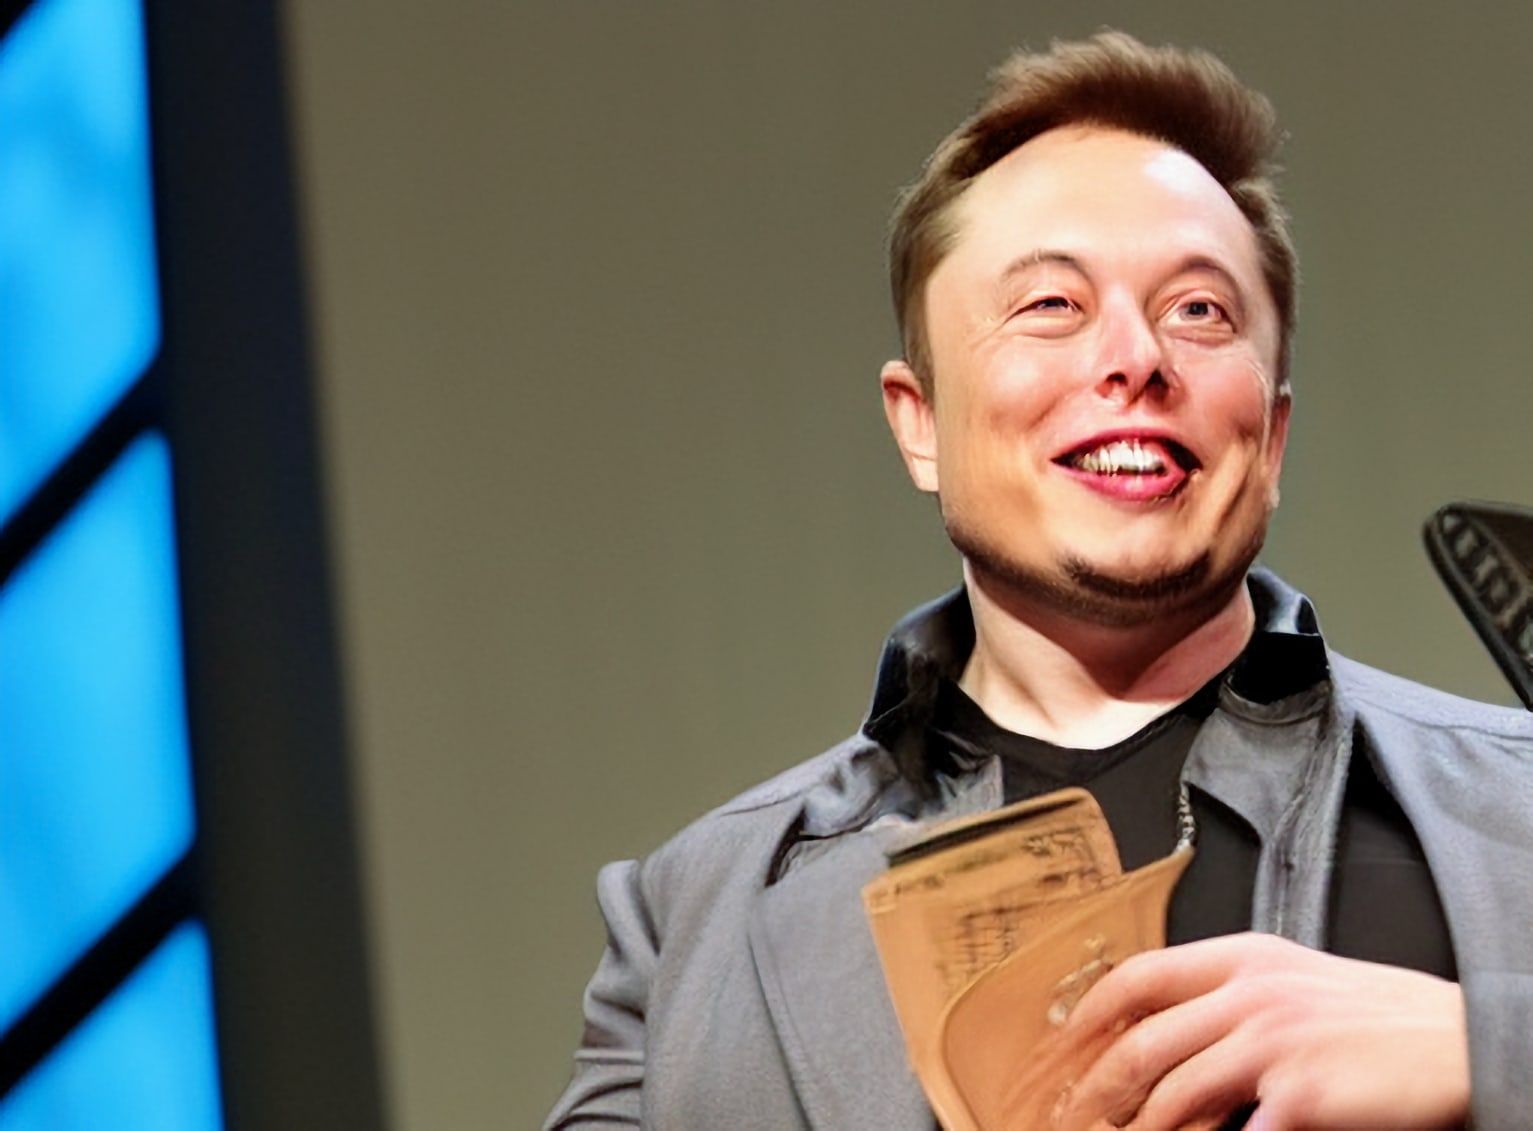 Five quick thoughts about what Musk’s Twitter means for journalism